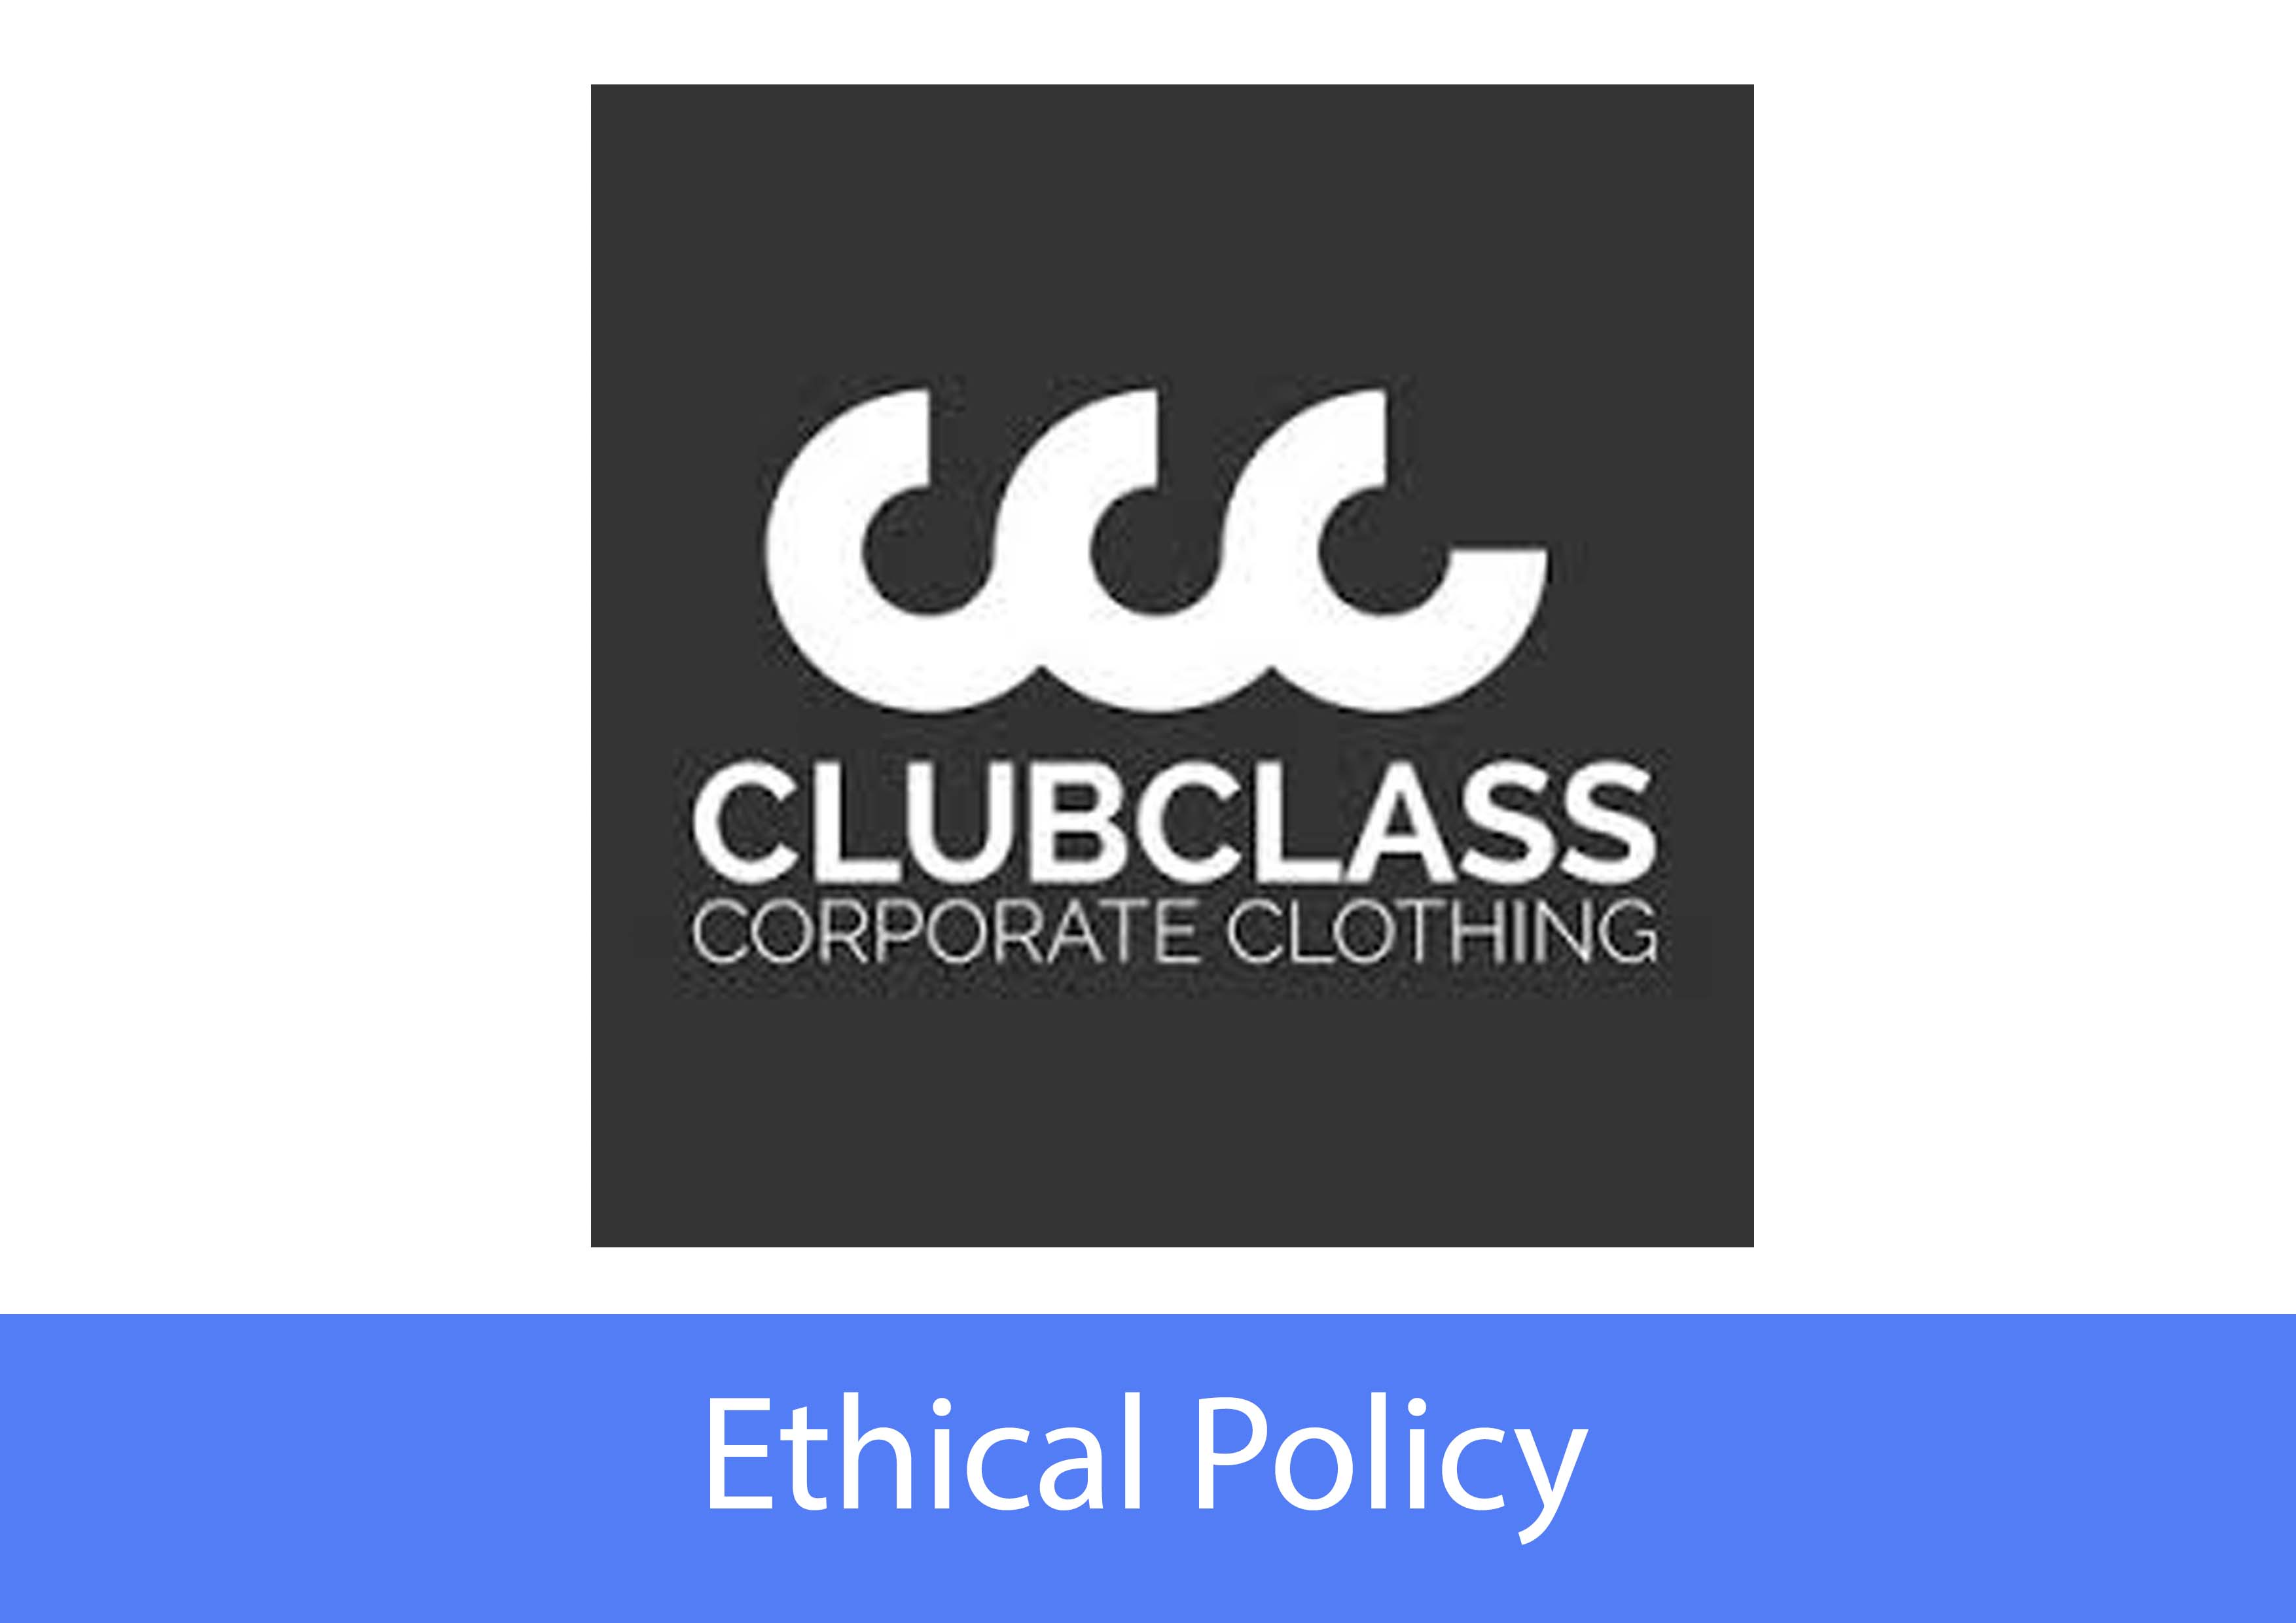 Ethical Policy Clublass